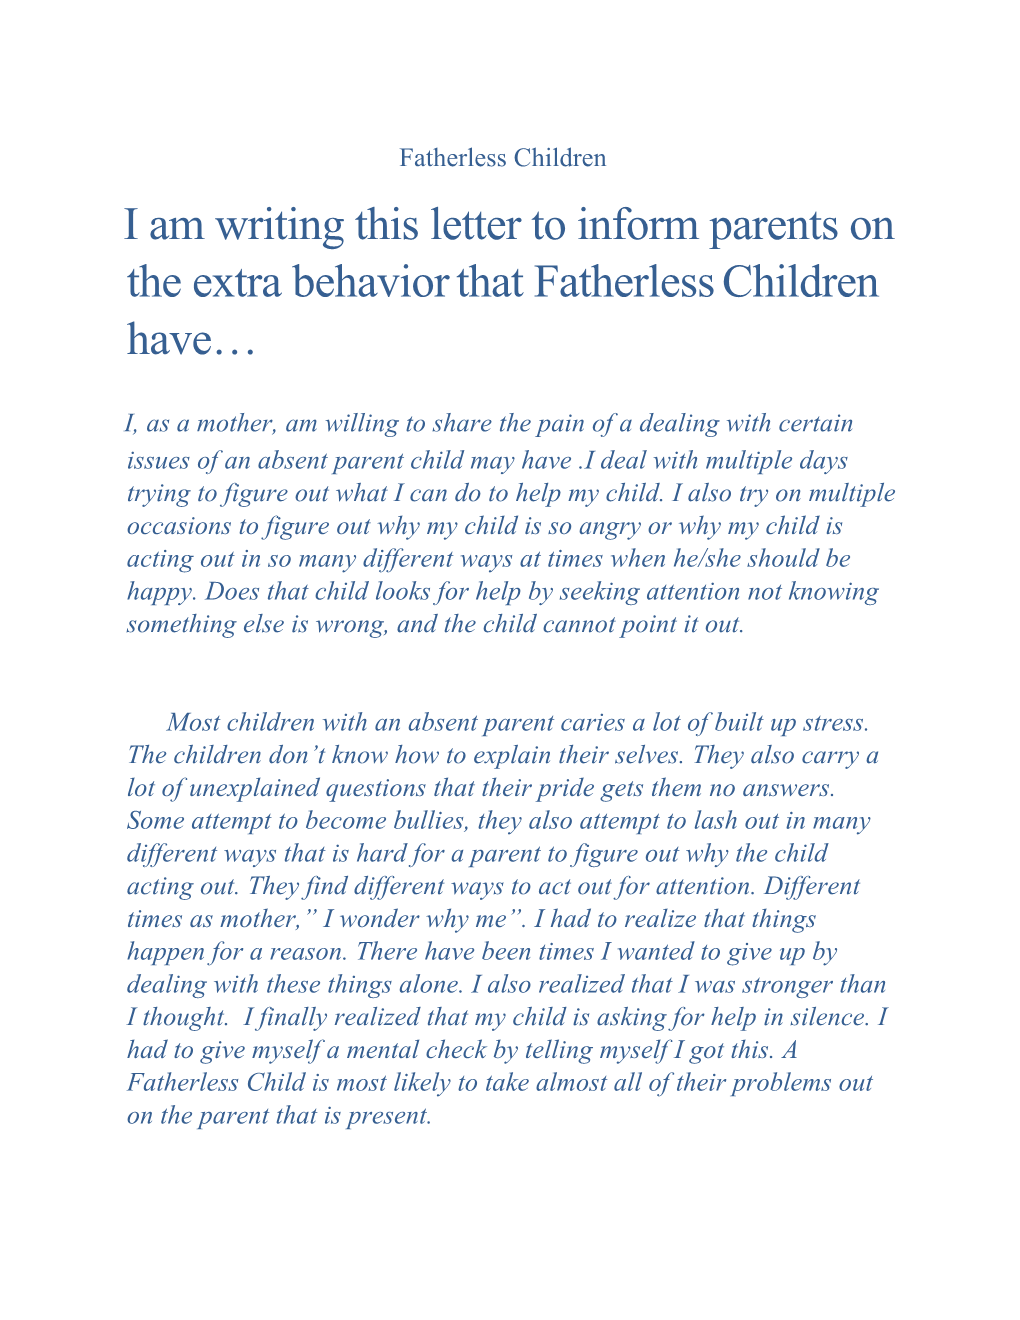 I Am Writing This Letter to Inform Parents on the Extra Behaviorthat Fatherlesschildren Have